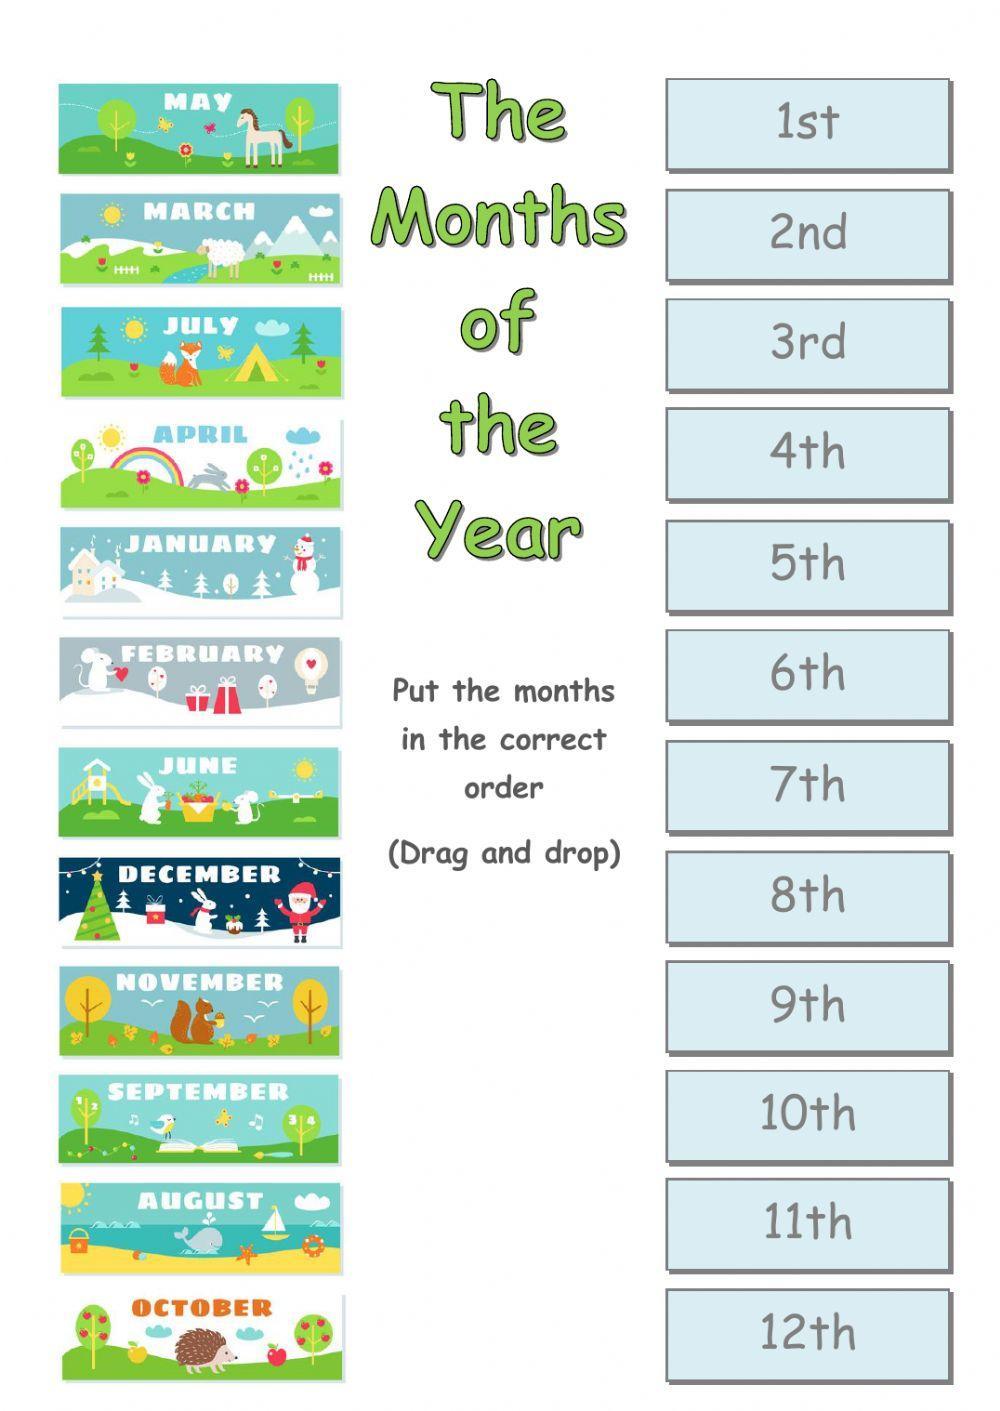 The months of the year